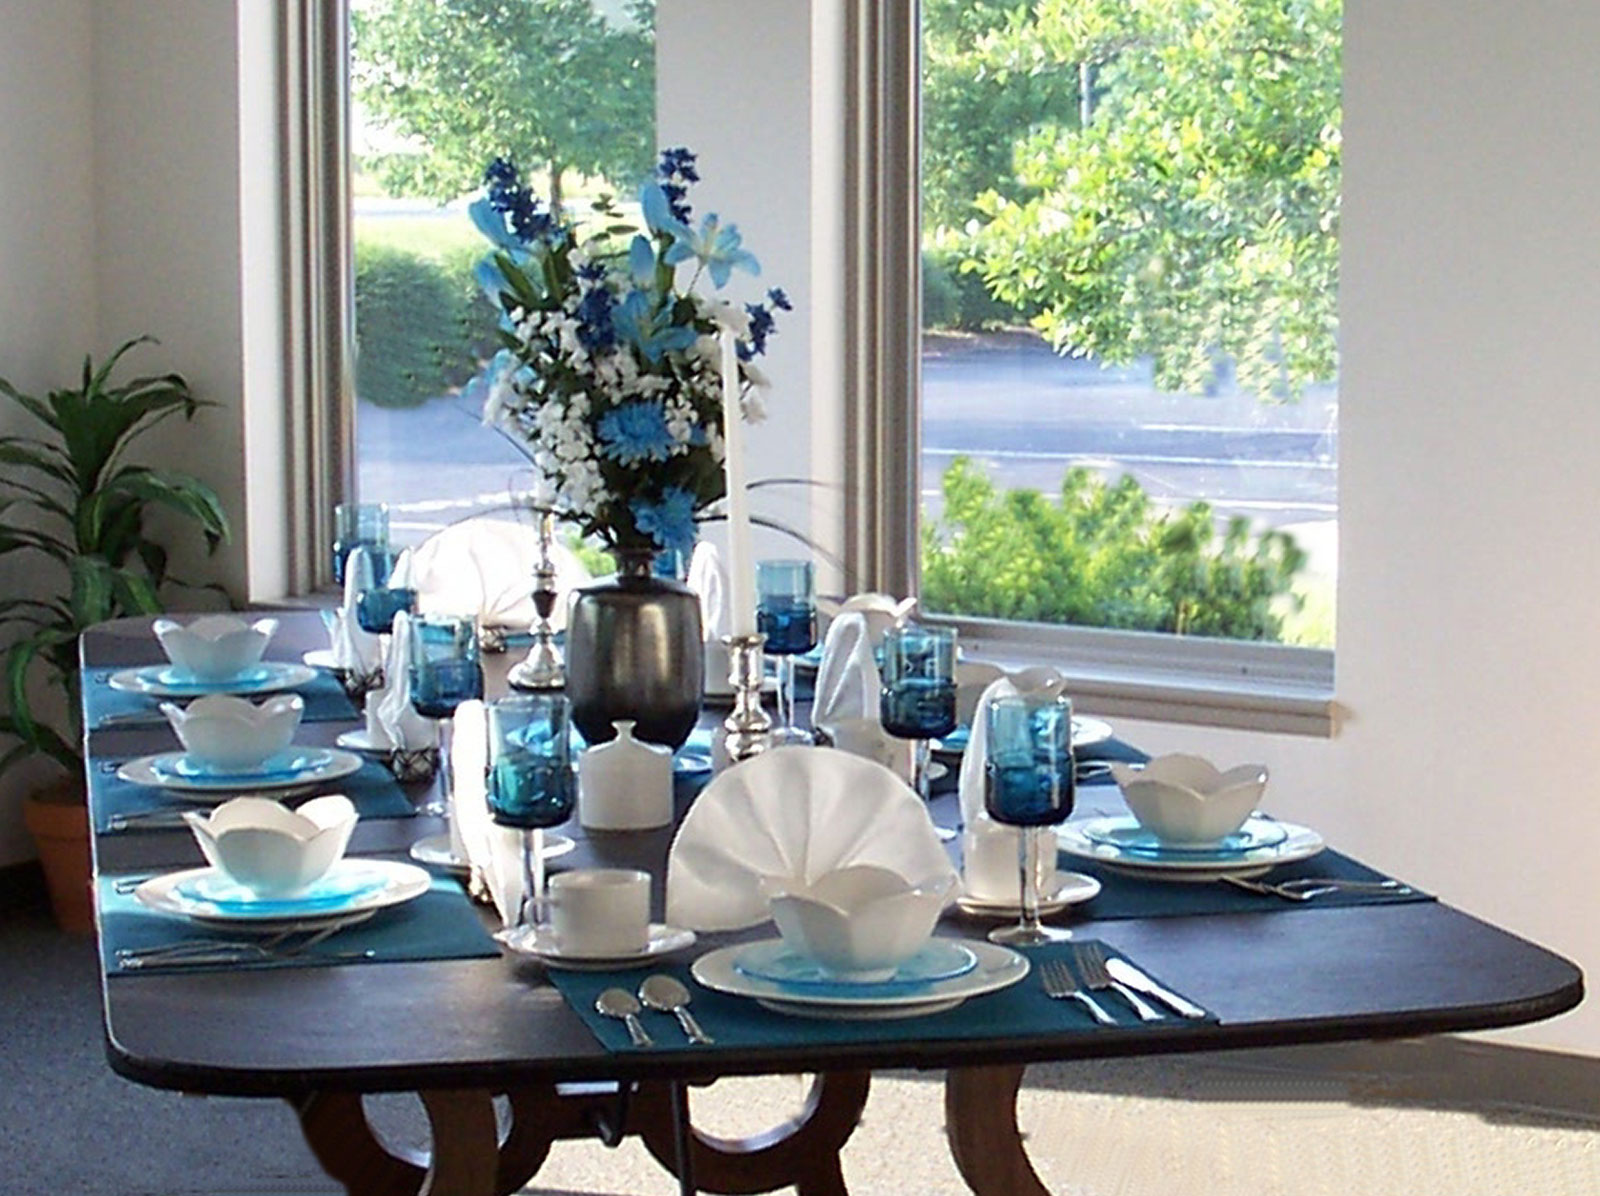 Flower Centerpiece Blue Cool Flower Centerpiece Mixed With Blue Dining Room Table Pads And Pretty Crockeries Decoration Dining Room 10 Stylish Dining Table Pads For Your Ultra Home Appearance